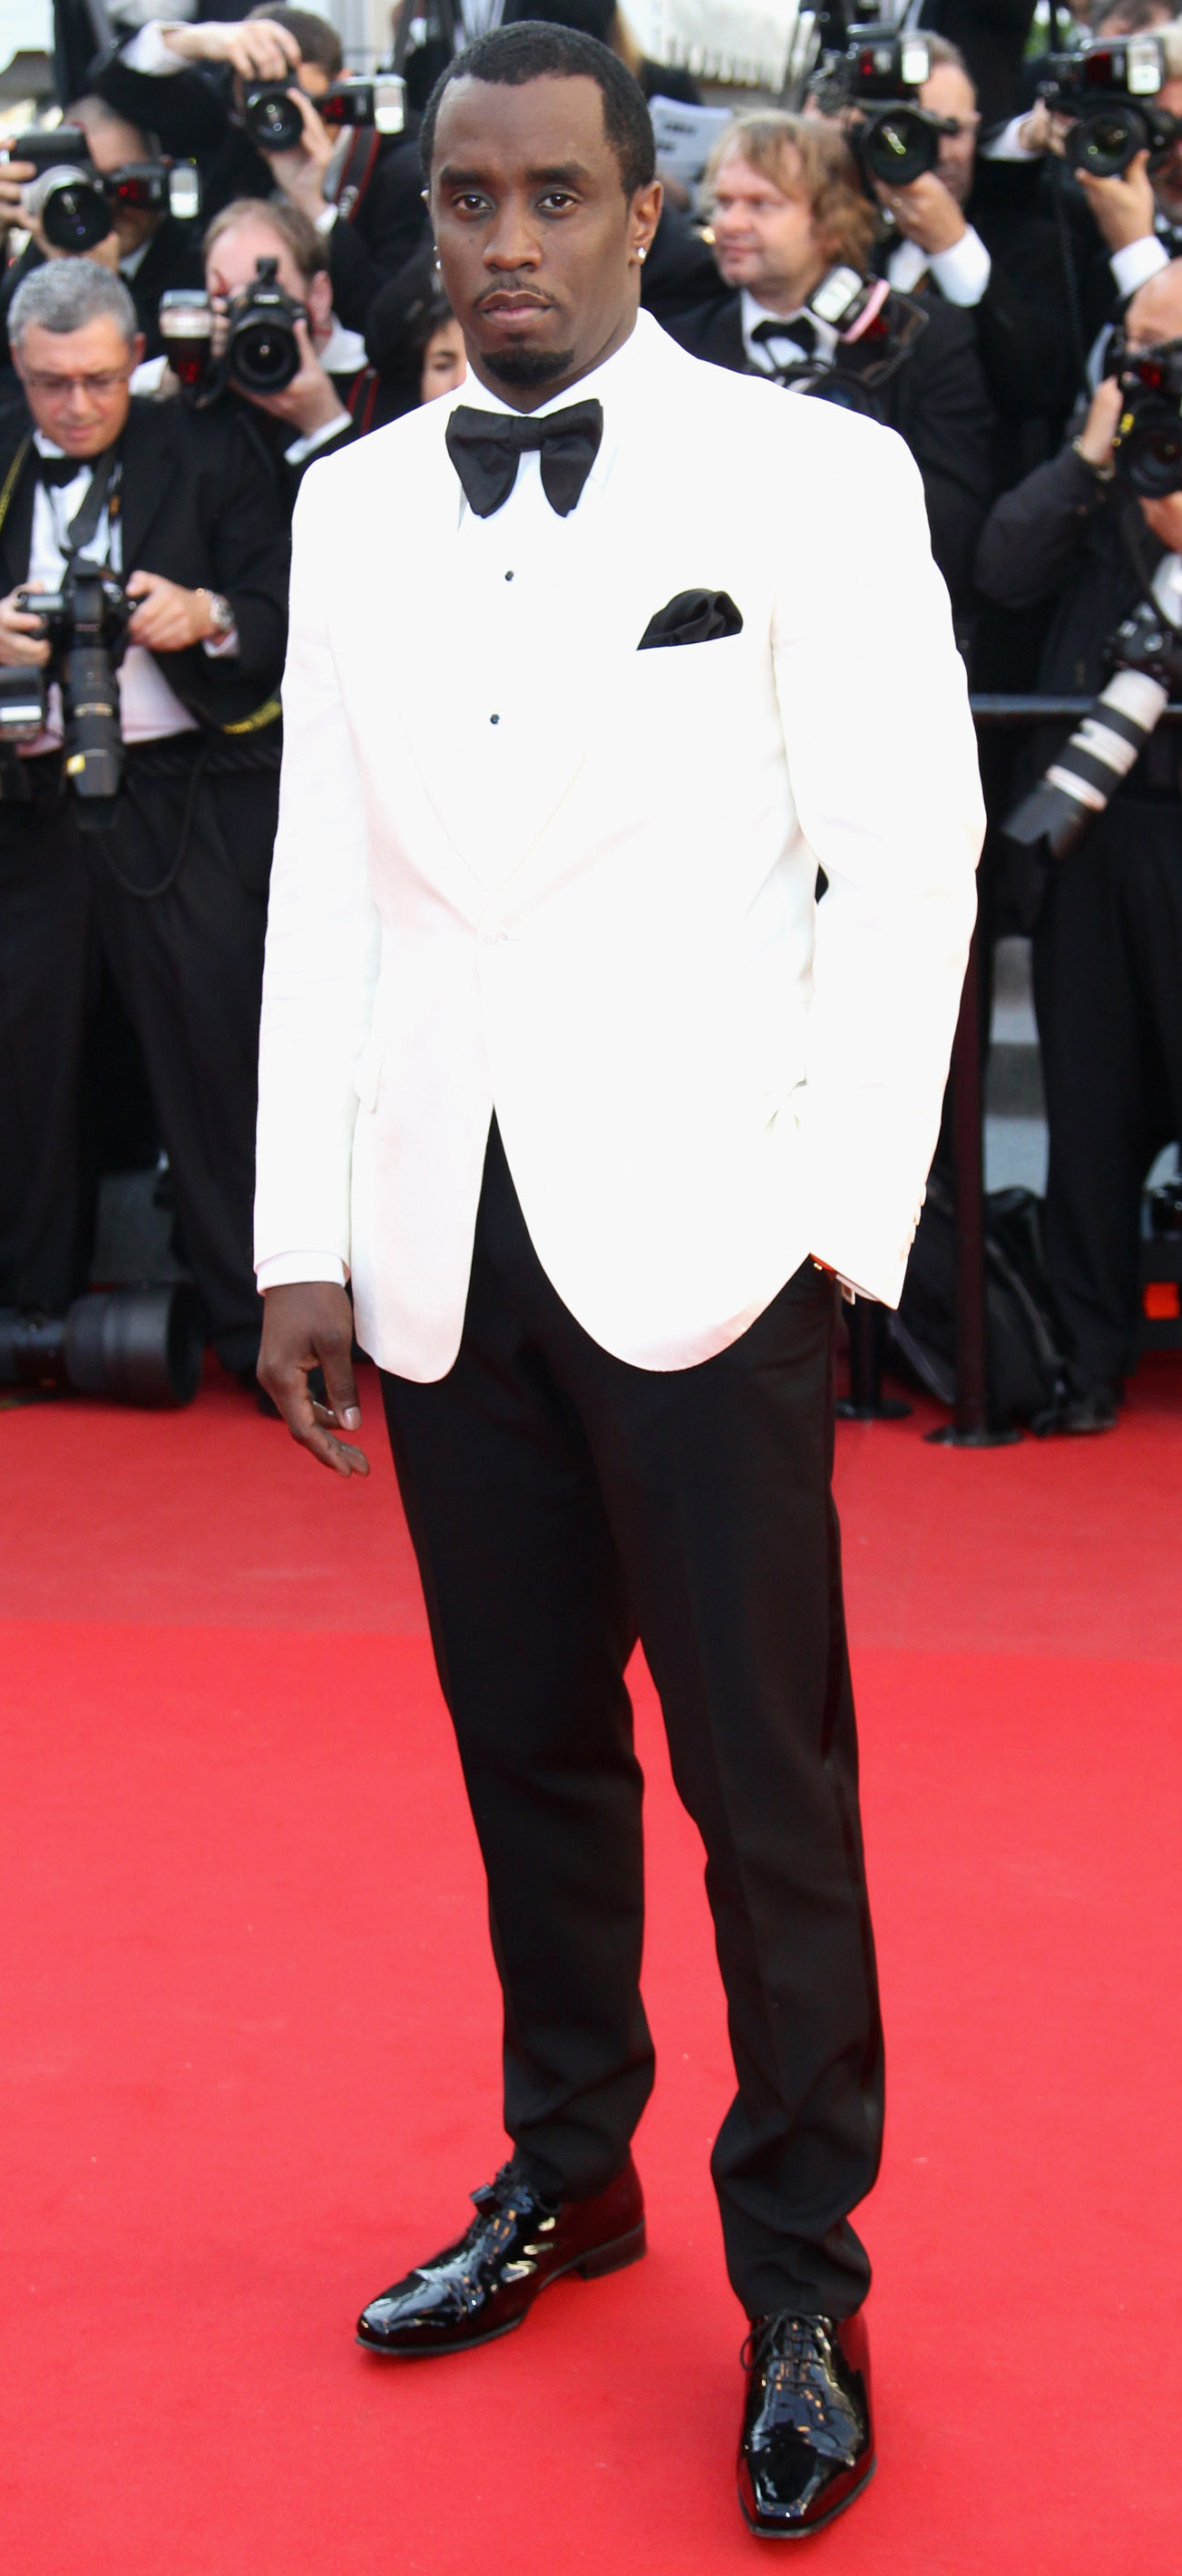 CANNES, FRANCE - MAY 22: Musician Sean "P.Diddy" Combs arrives at "Killing Them Softly" Premiere during the 65th Annual Cannes Film Festival at Palais des Festivals on May 22, 2012 in Cannes, France. (Photo by Vittorio Zunino Celotto/WireImage for Electrolux)